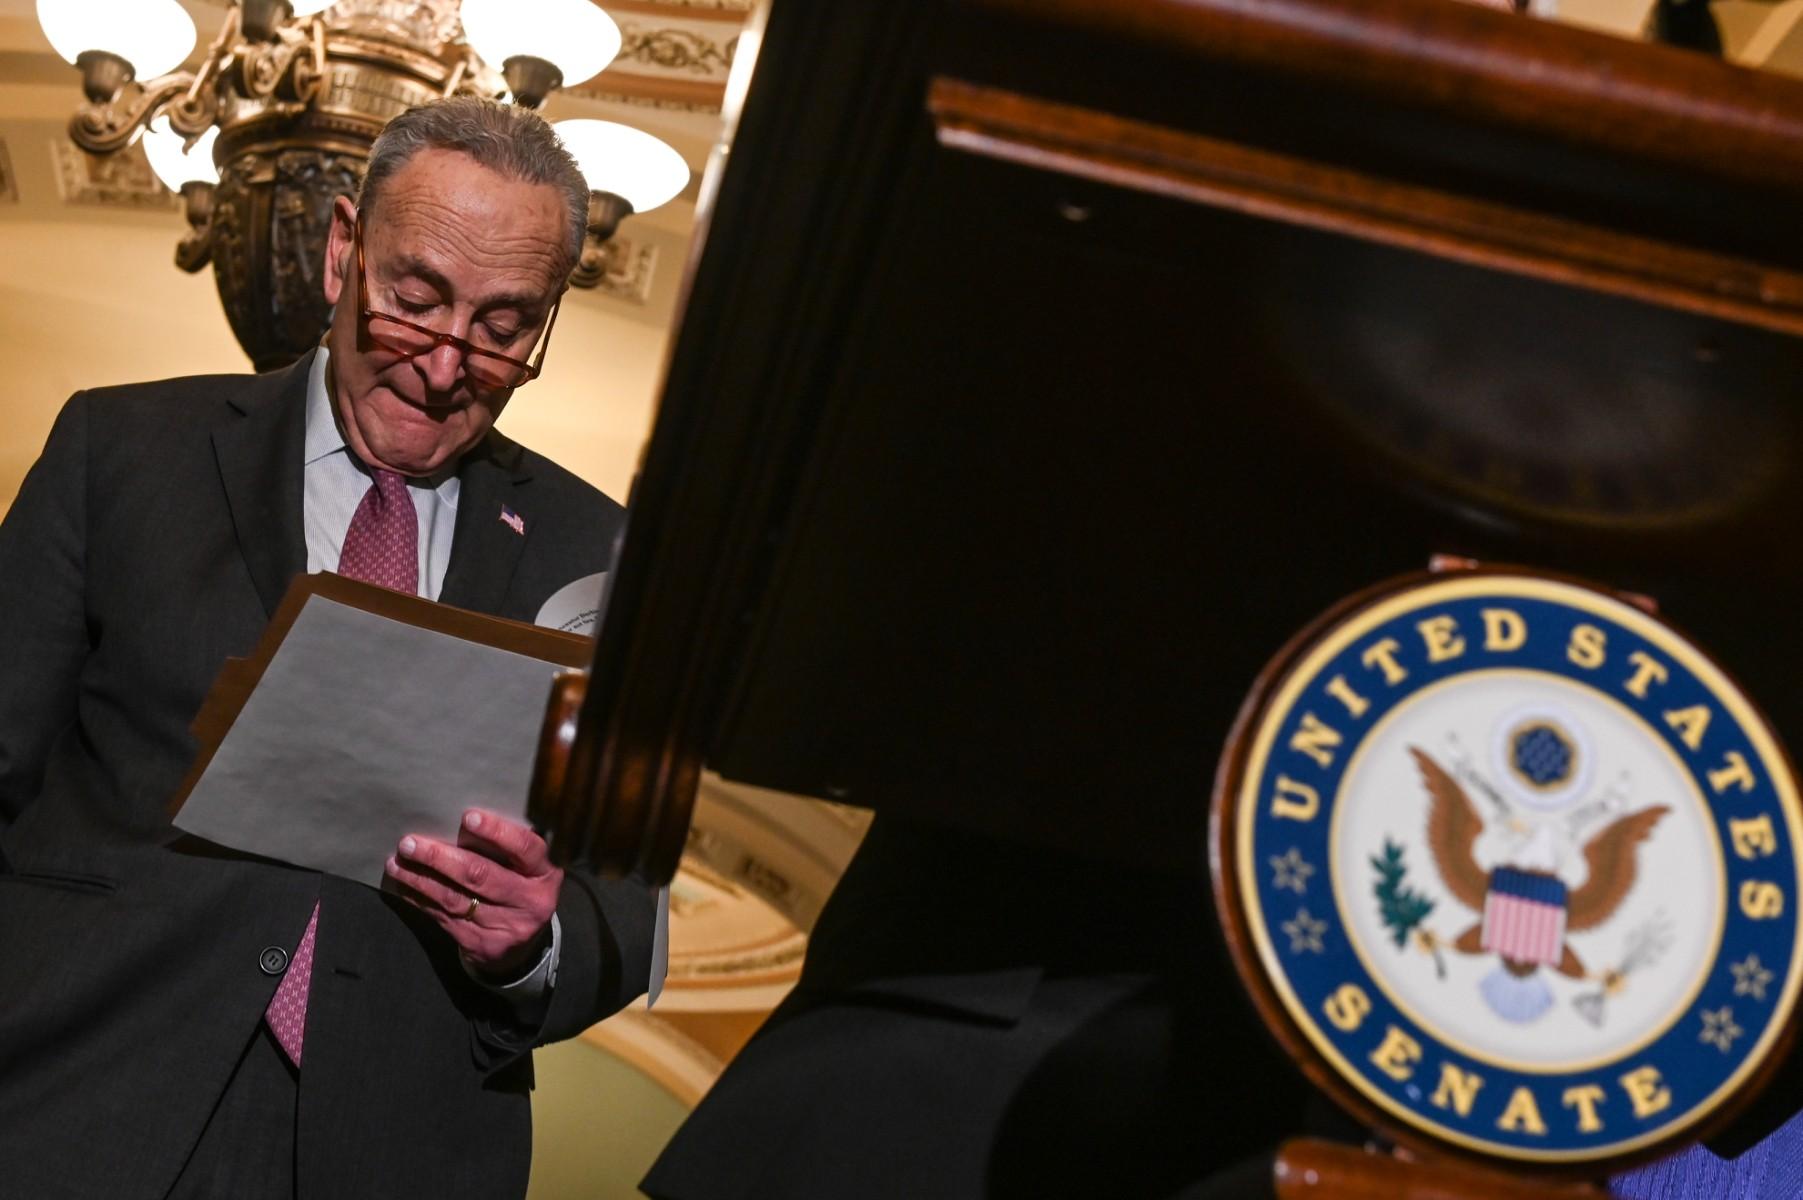 US Senate Majority leader Chuck Schumer waits to speak to journalists after a policy luncheon in Capitol Hill, in Washington, DC, on Dec 14. Photo: AFP